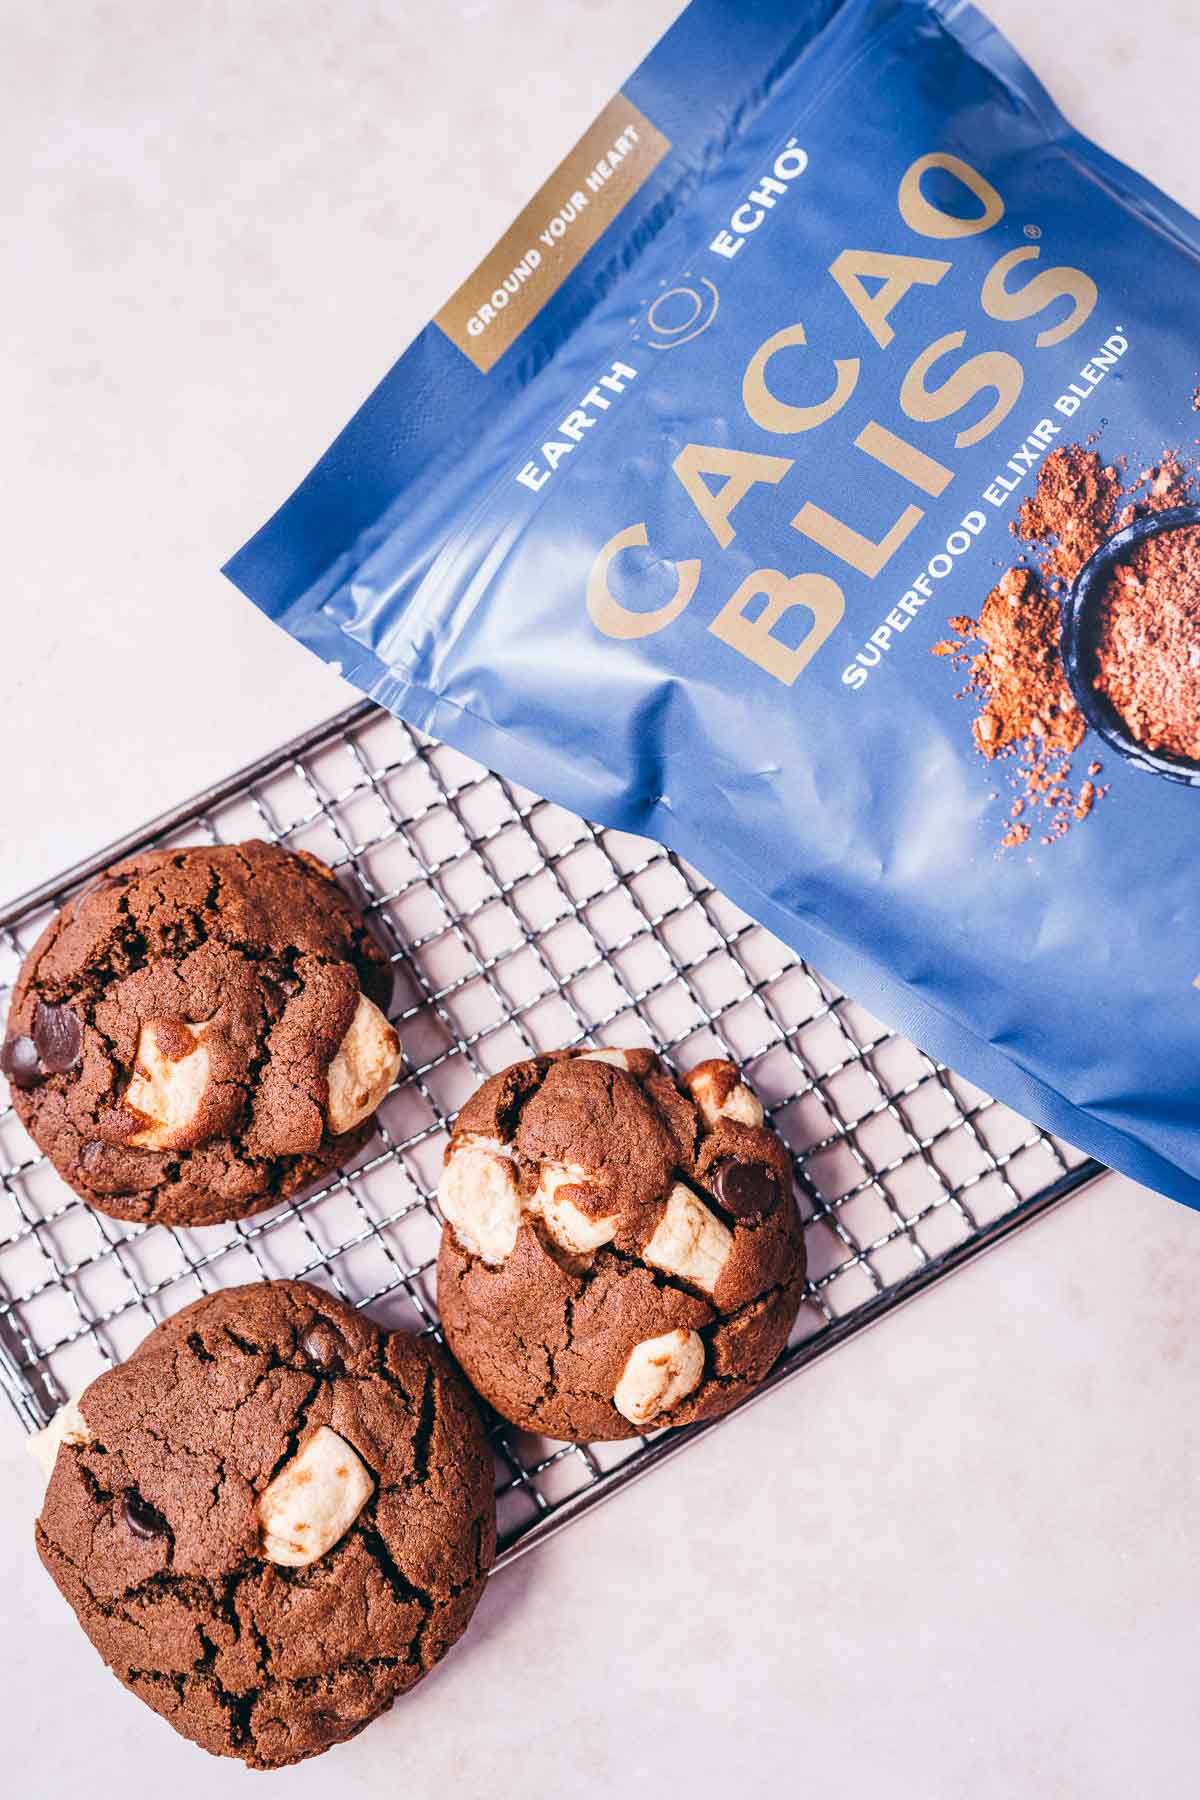 A blue bag of Earth Echo Cacao Bliss rests next to some chocolate marshmallow cookies.